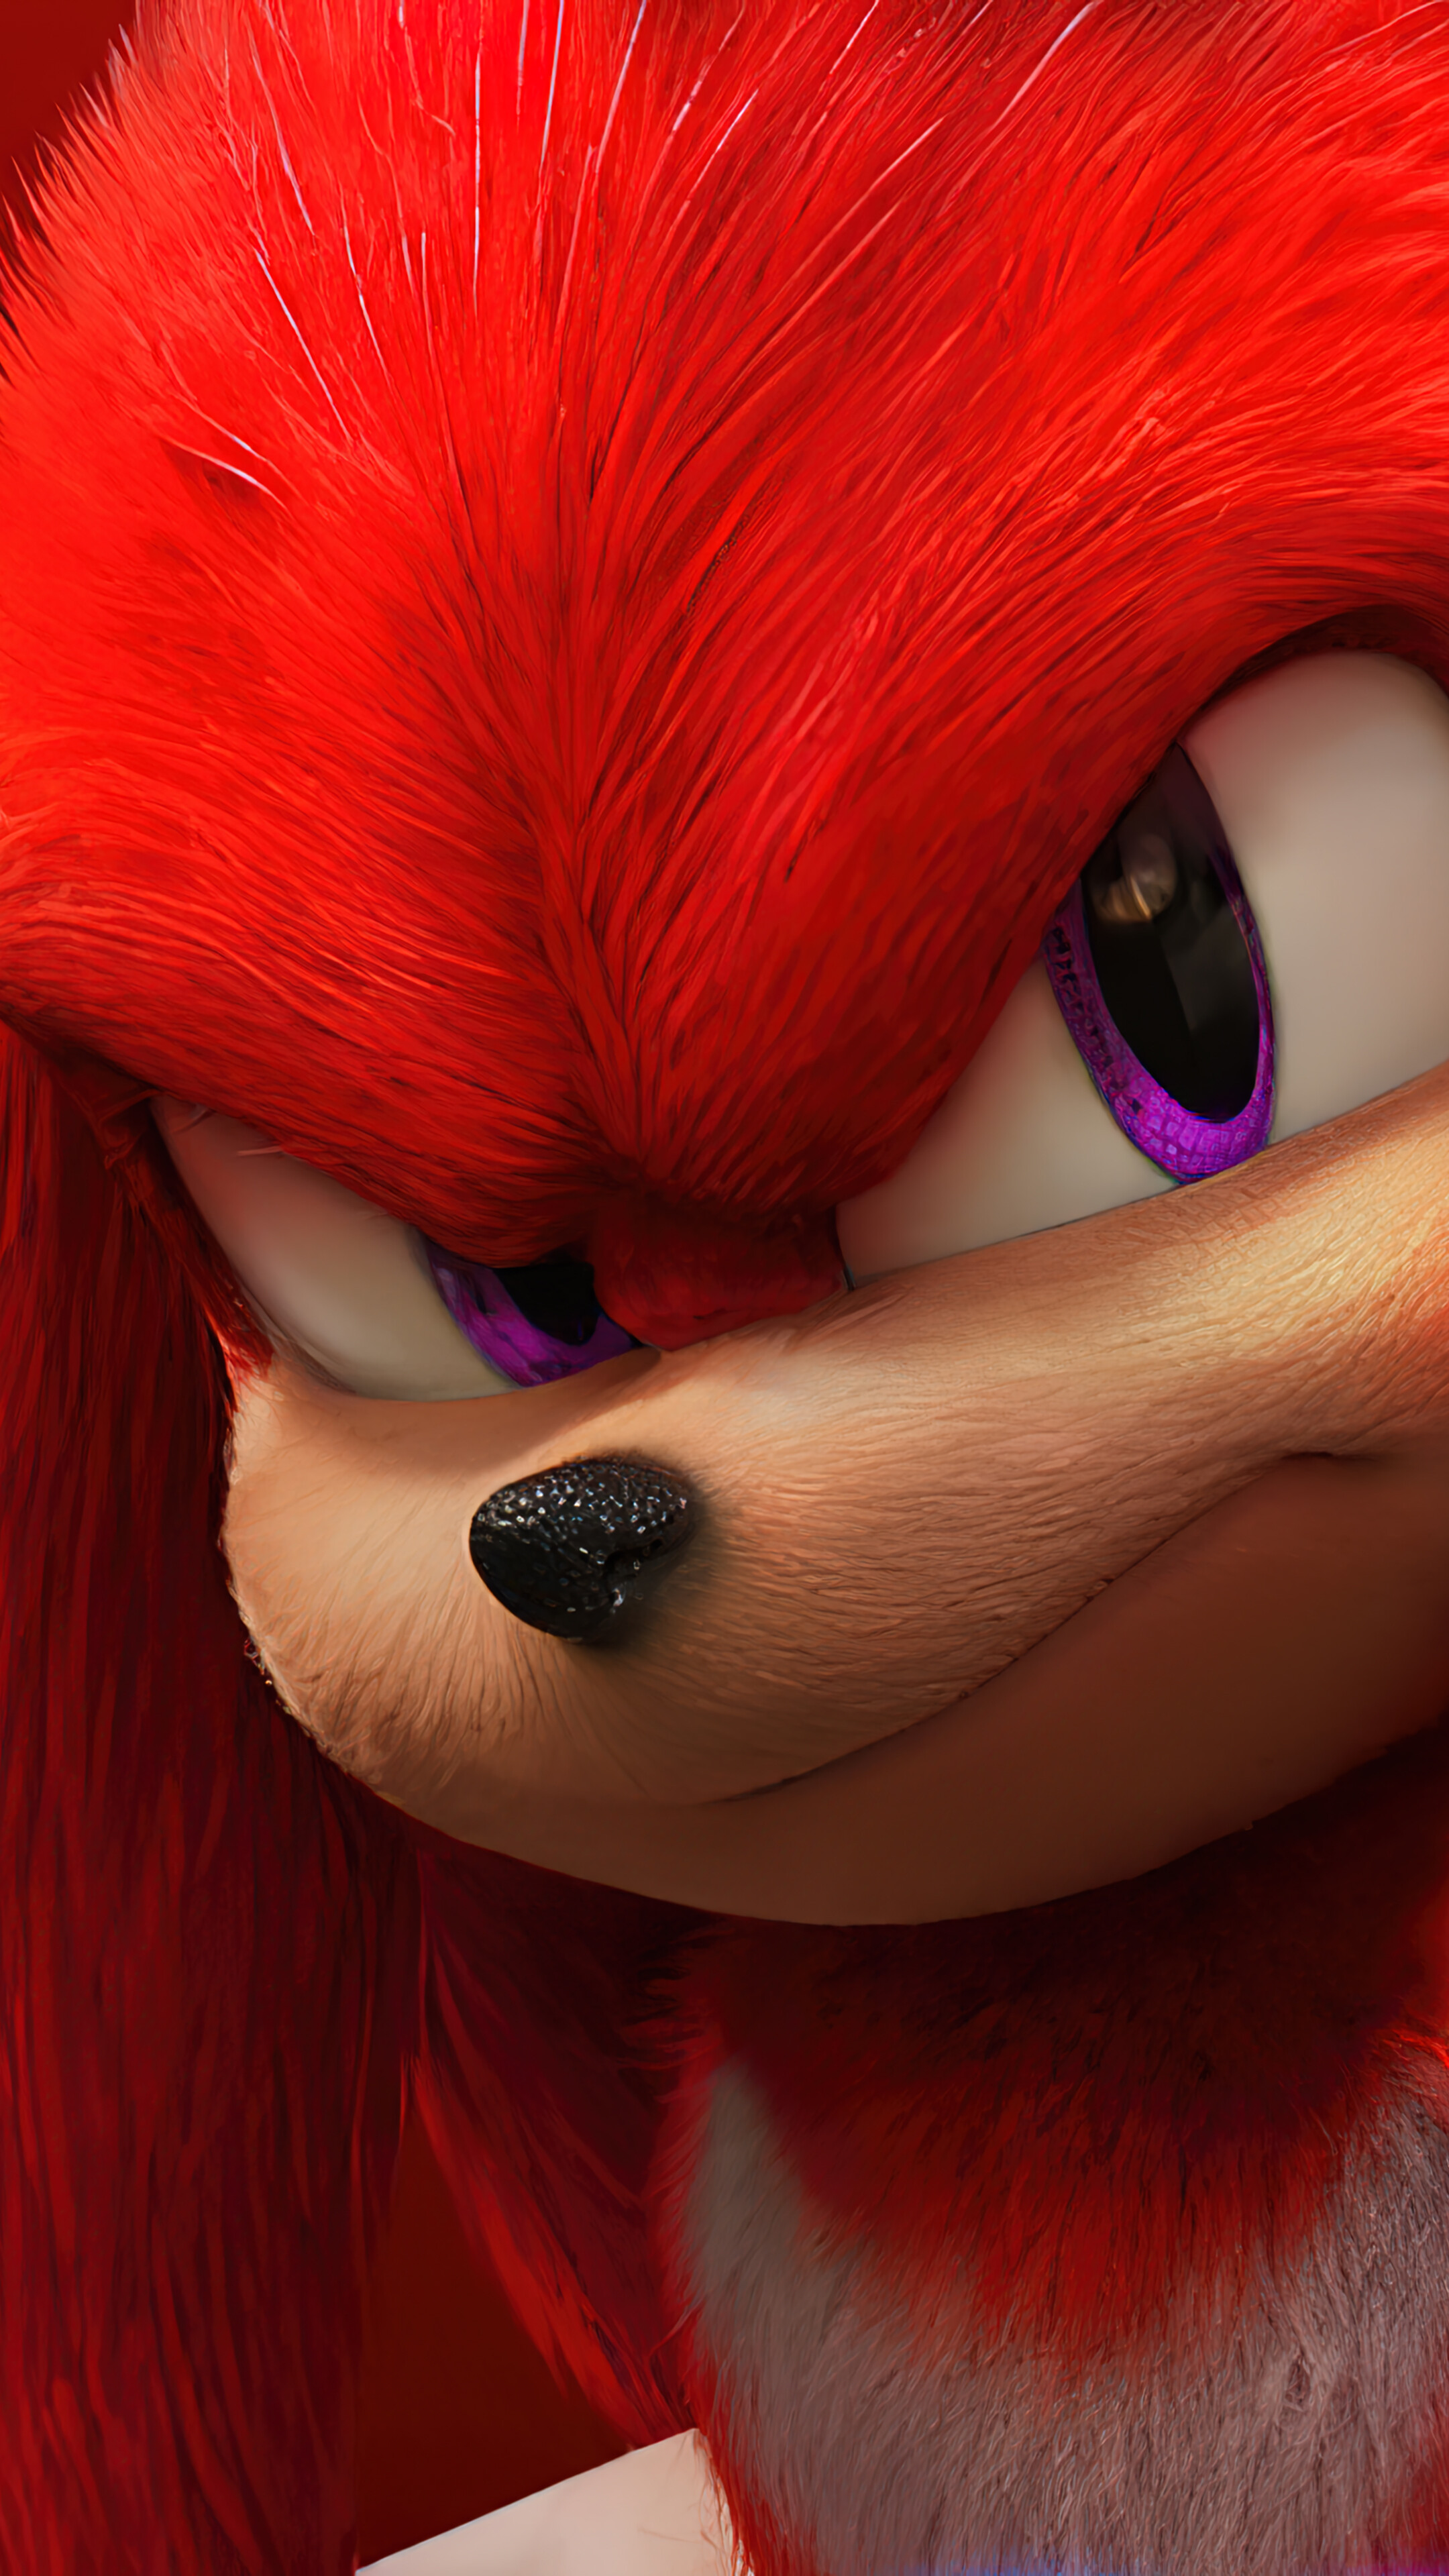 Knuckles Sonic the Hedgehog 2 Poster Wallpaper 4K HD PC 6201f